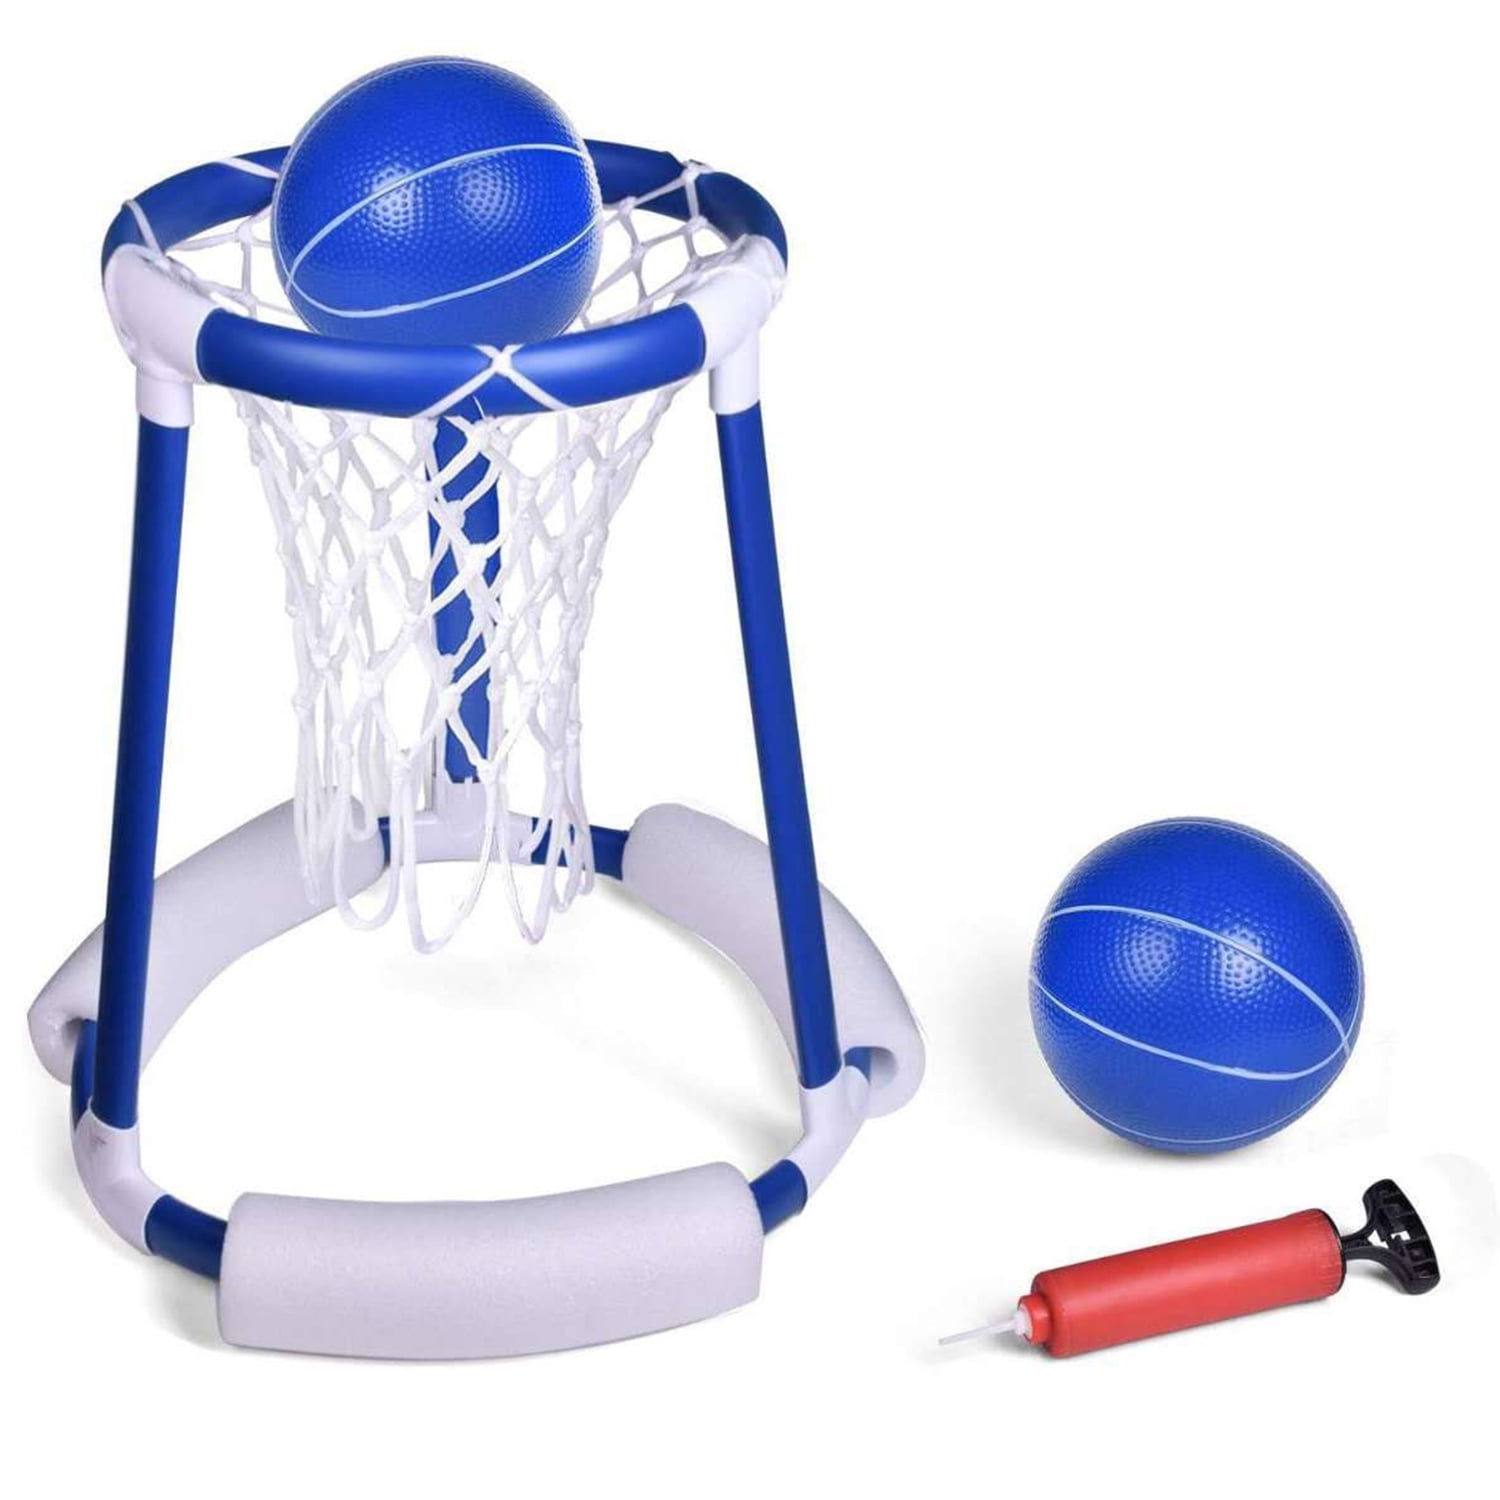 Swimline Super Hoops Floating Swimming Pool Basketball Game with Ball9162 